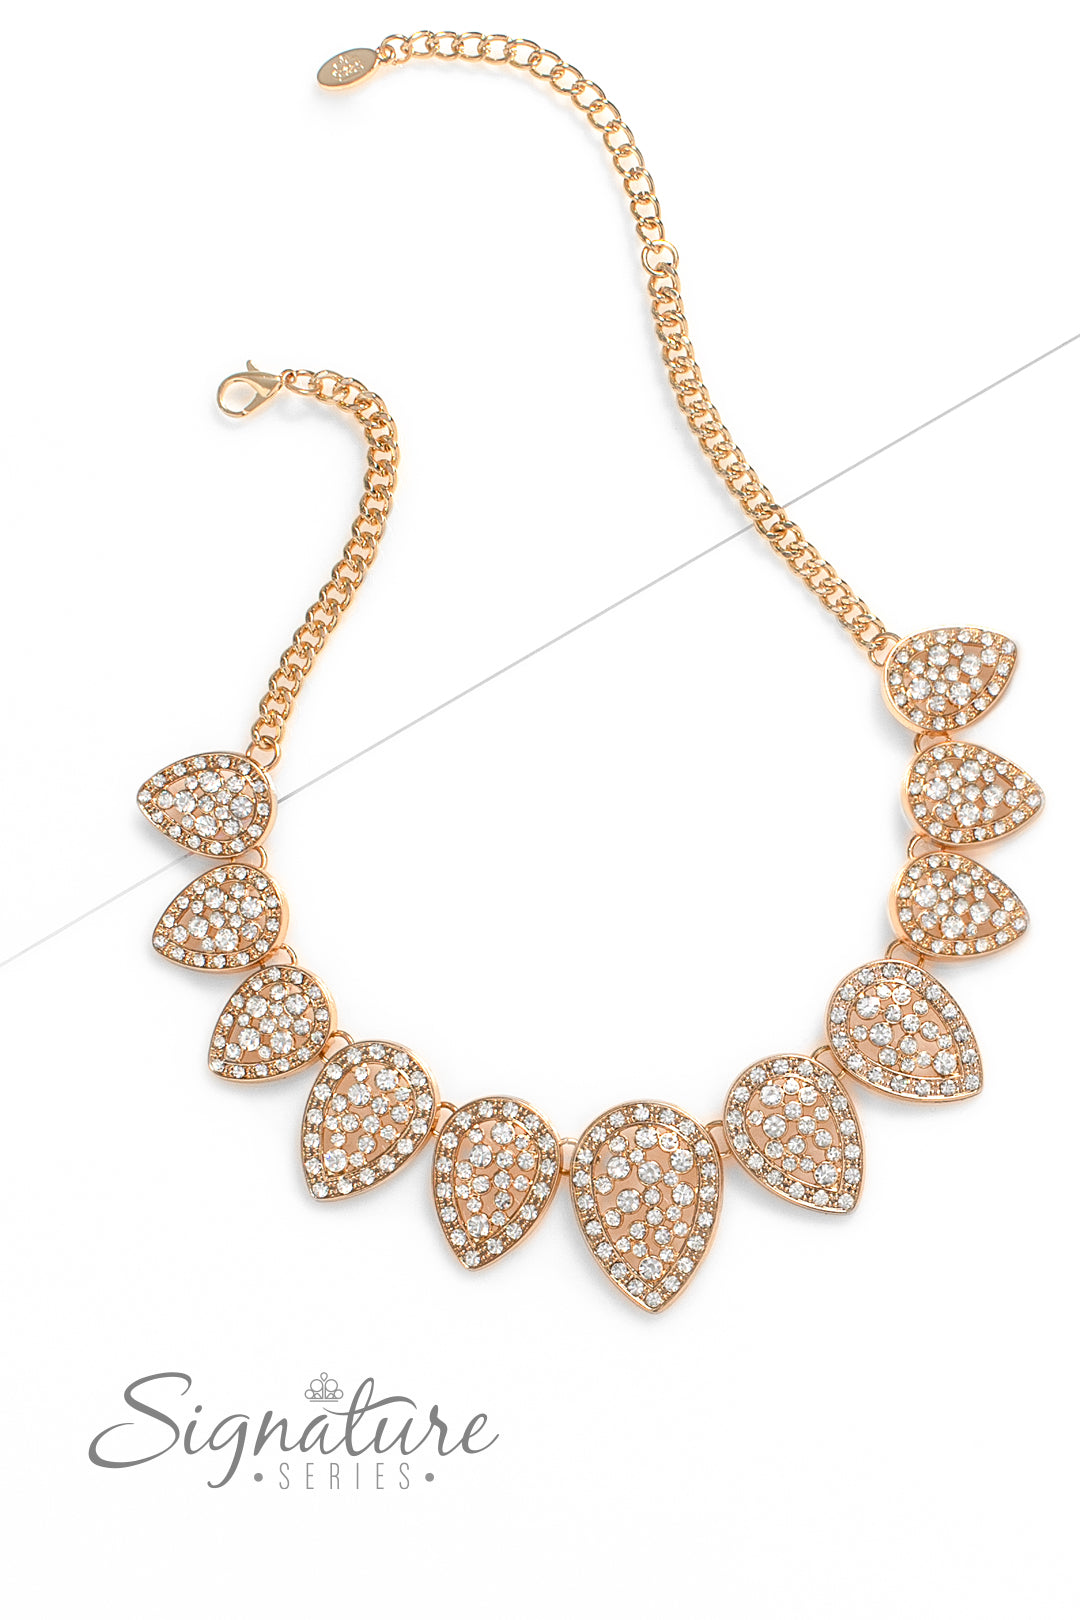 Gold teardrops are dusted in white rhinestones and flipped upside down, fanning out along the collar in a glittery display. Increasing in size as they lead to the center, each teardrop sparkles intensely, showcasing its pristine borders and dramatic dazzle. Features an adjustable clasp closure.  Sold as one individual necklace. Includes one pair of matching earrings.